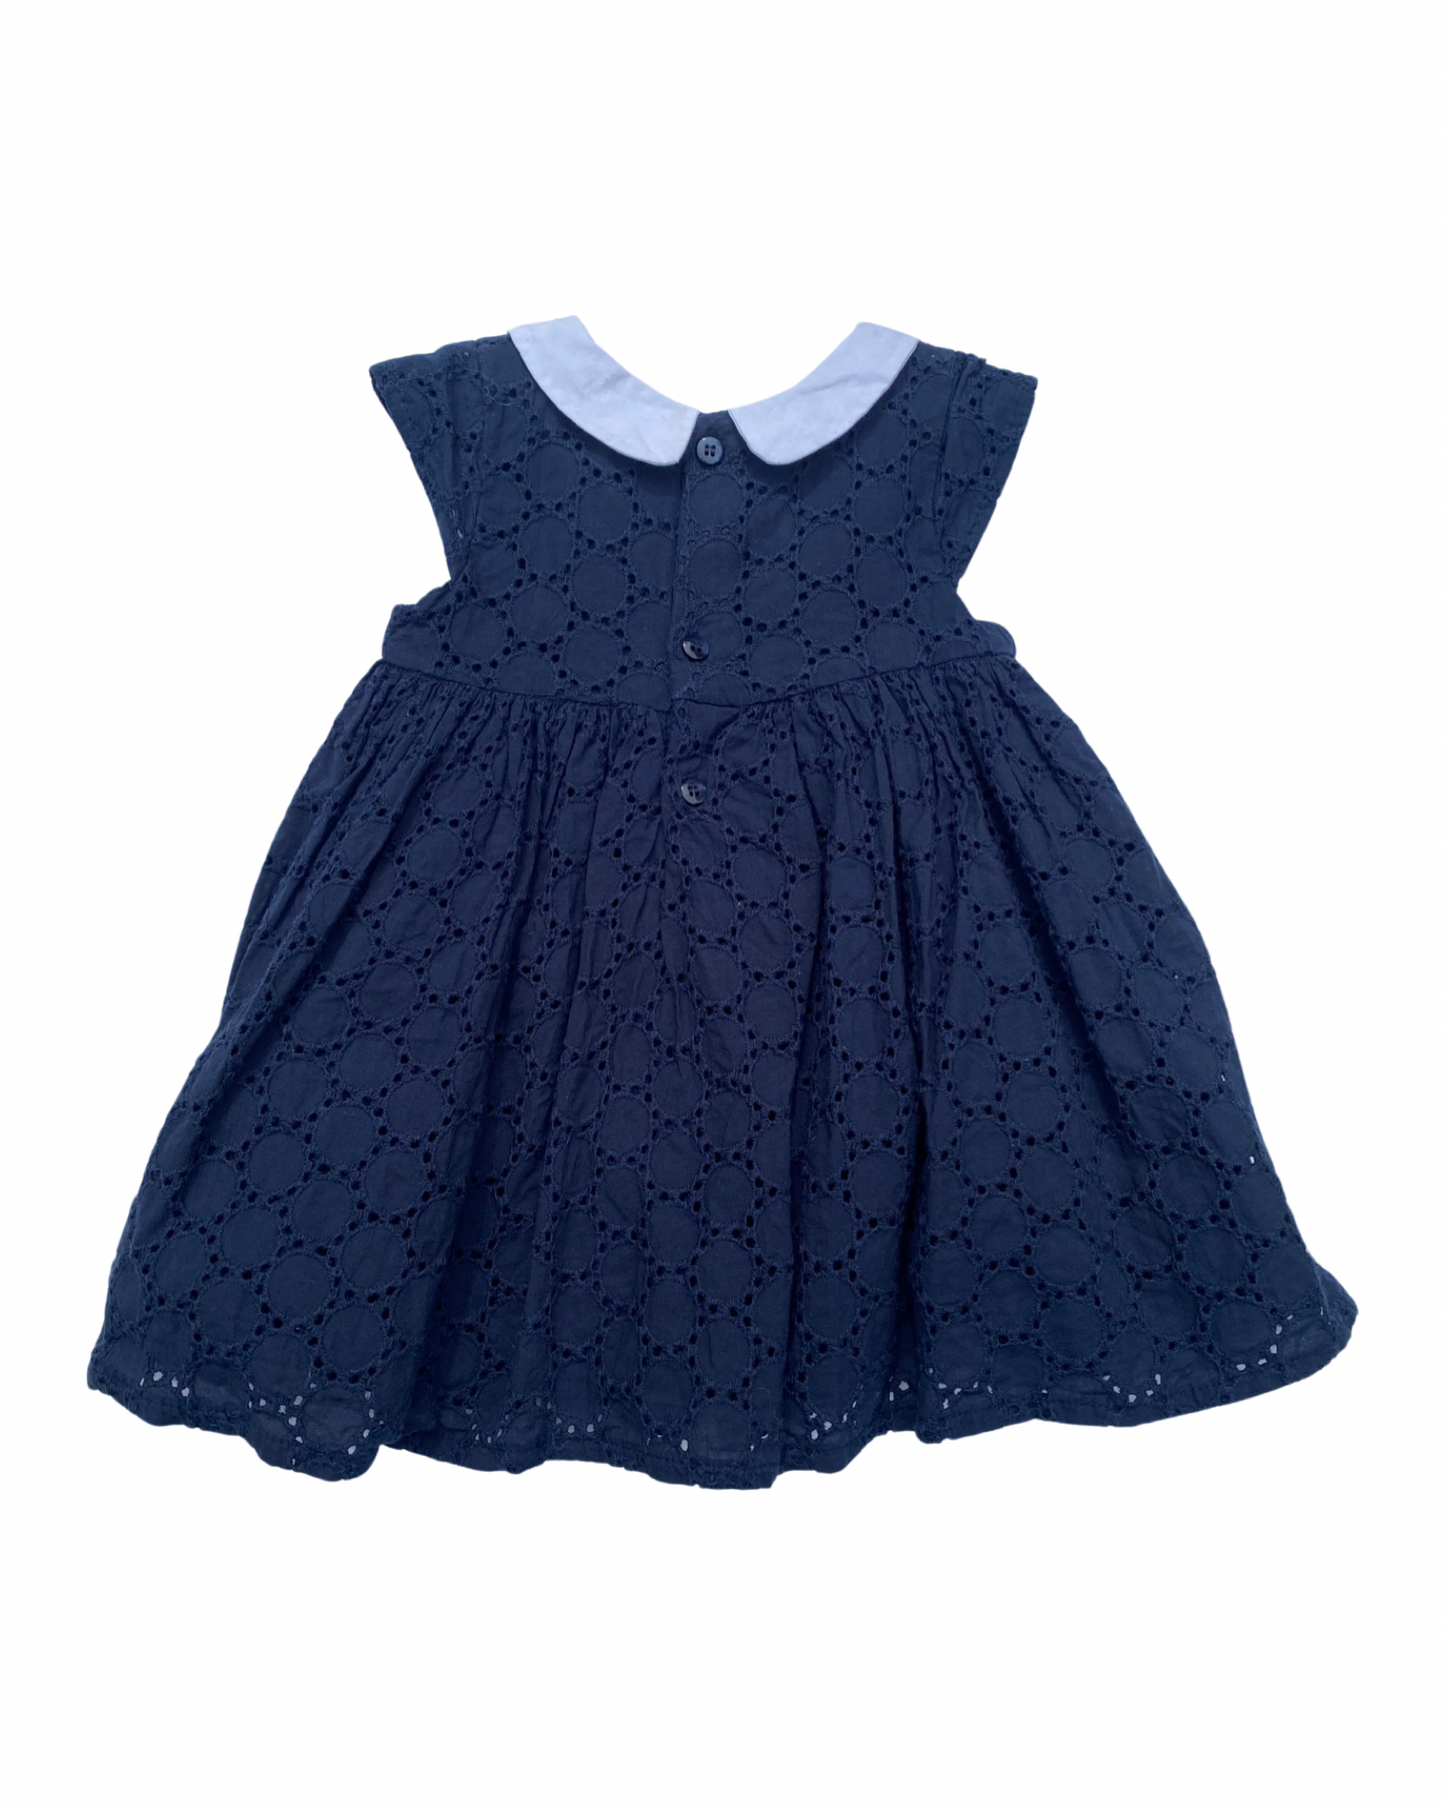 Mothercare Heritage navy dress (size 3-6mths)